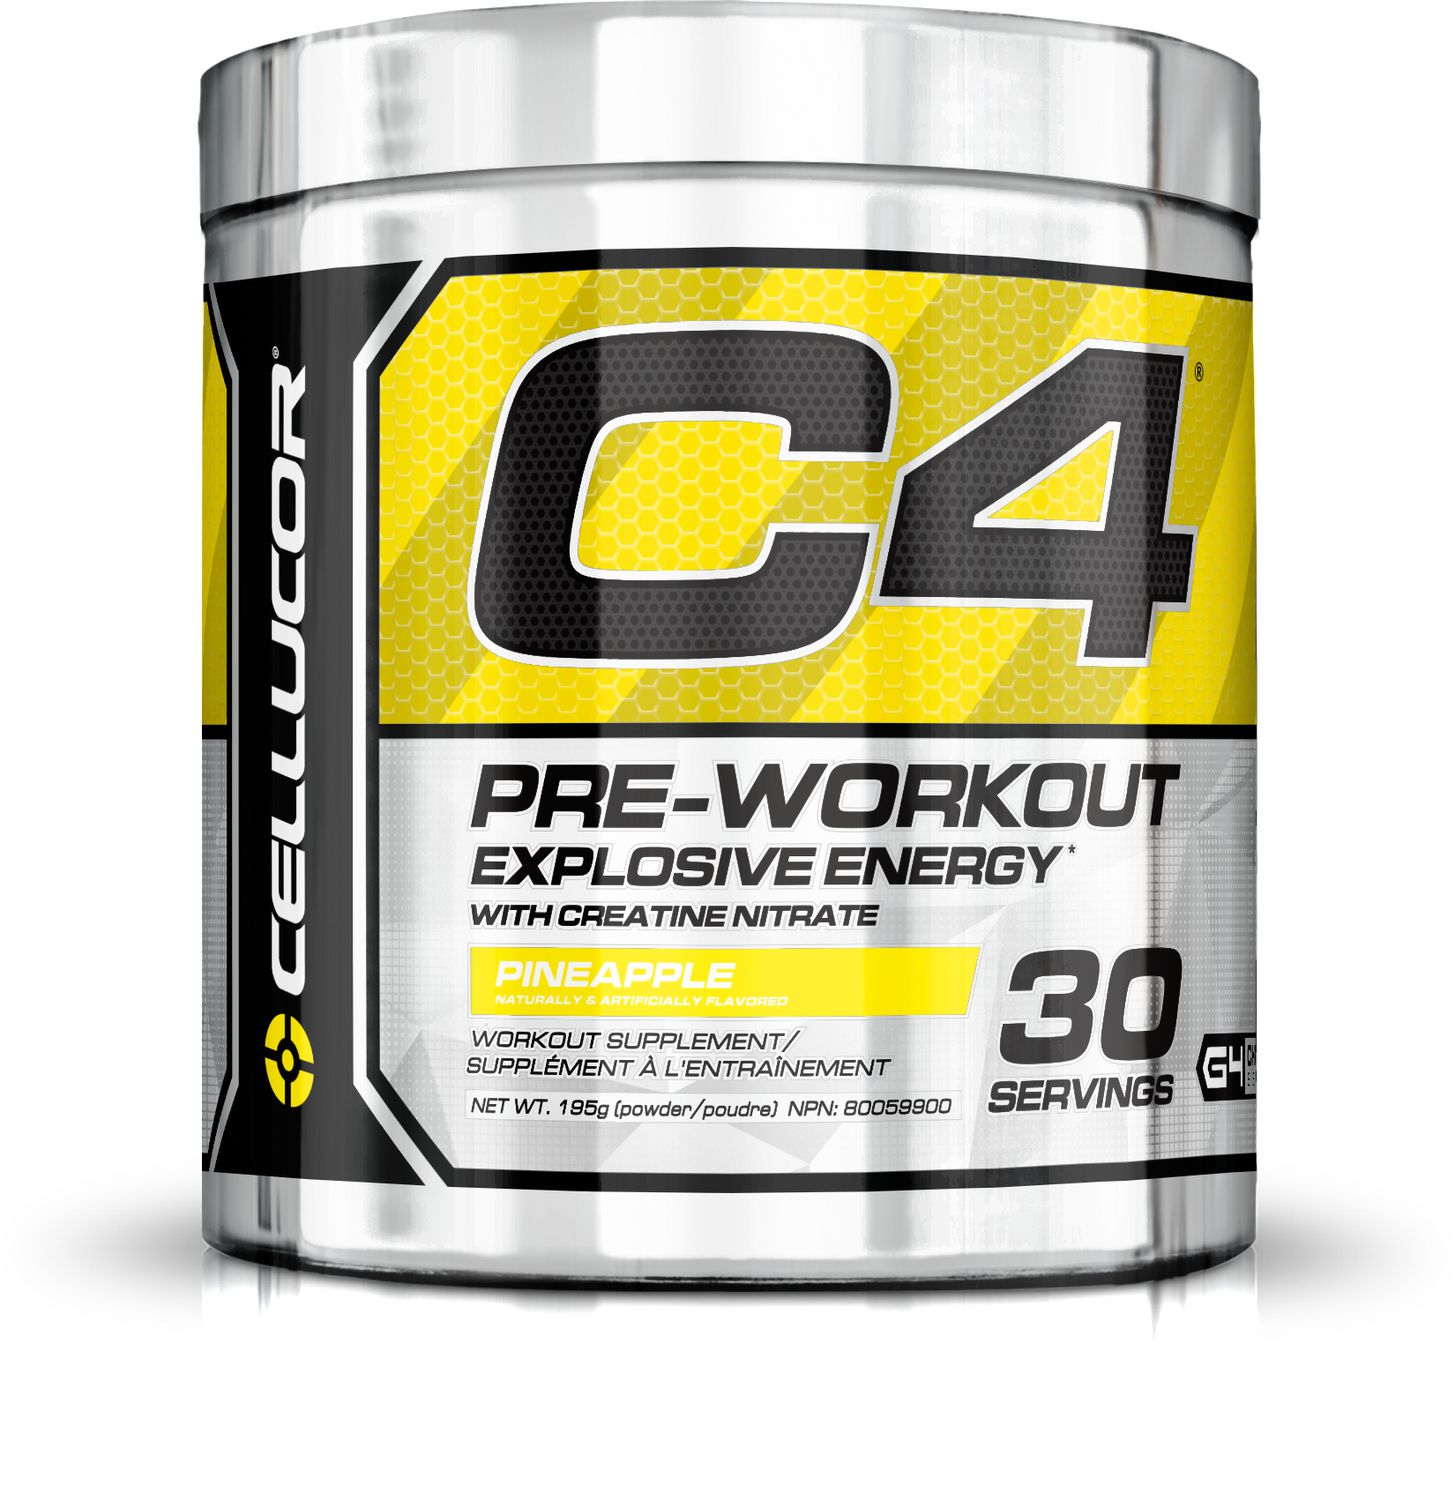 15 Minute C4 pre workout levels for Women